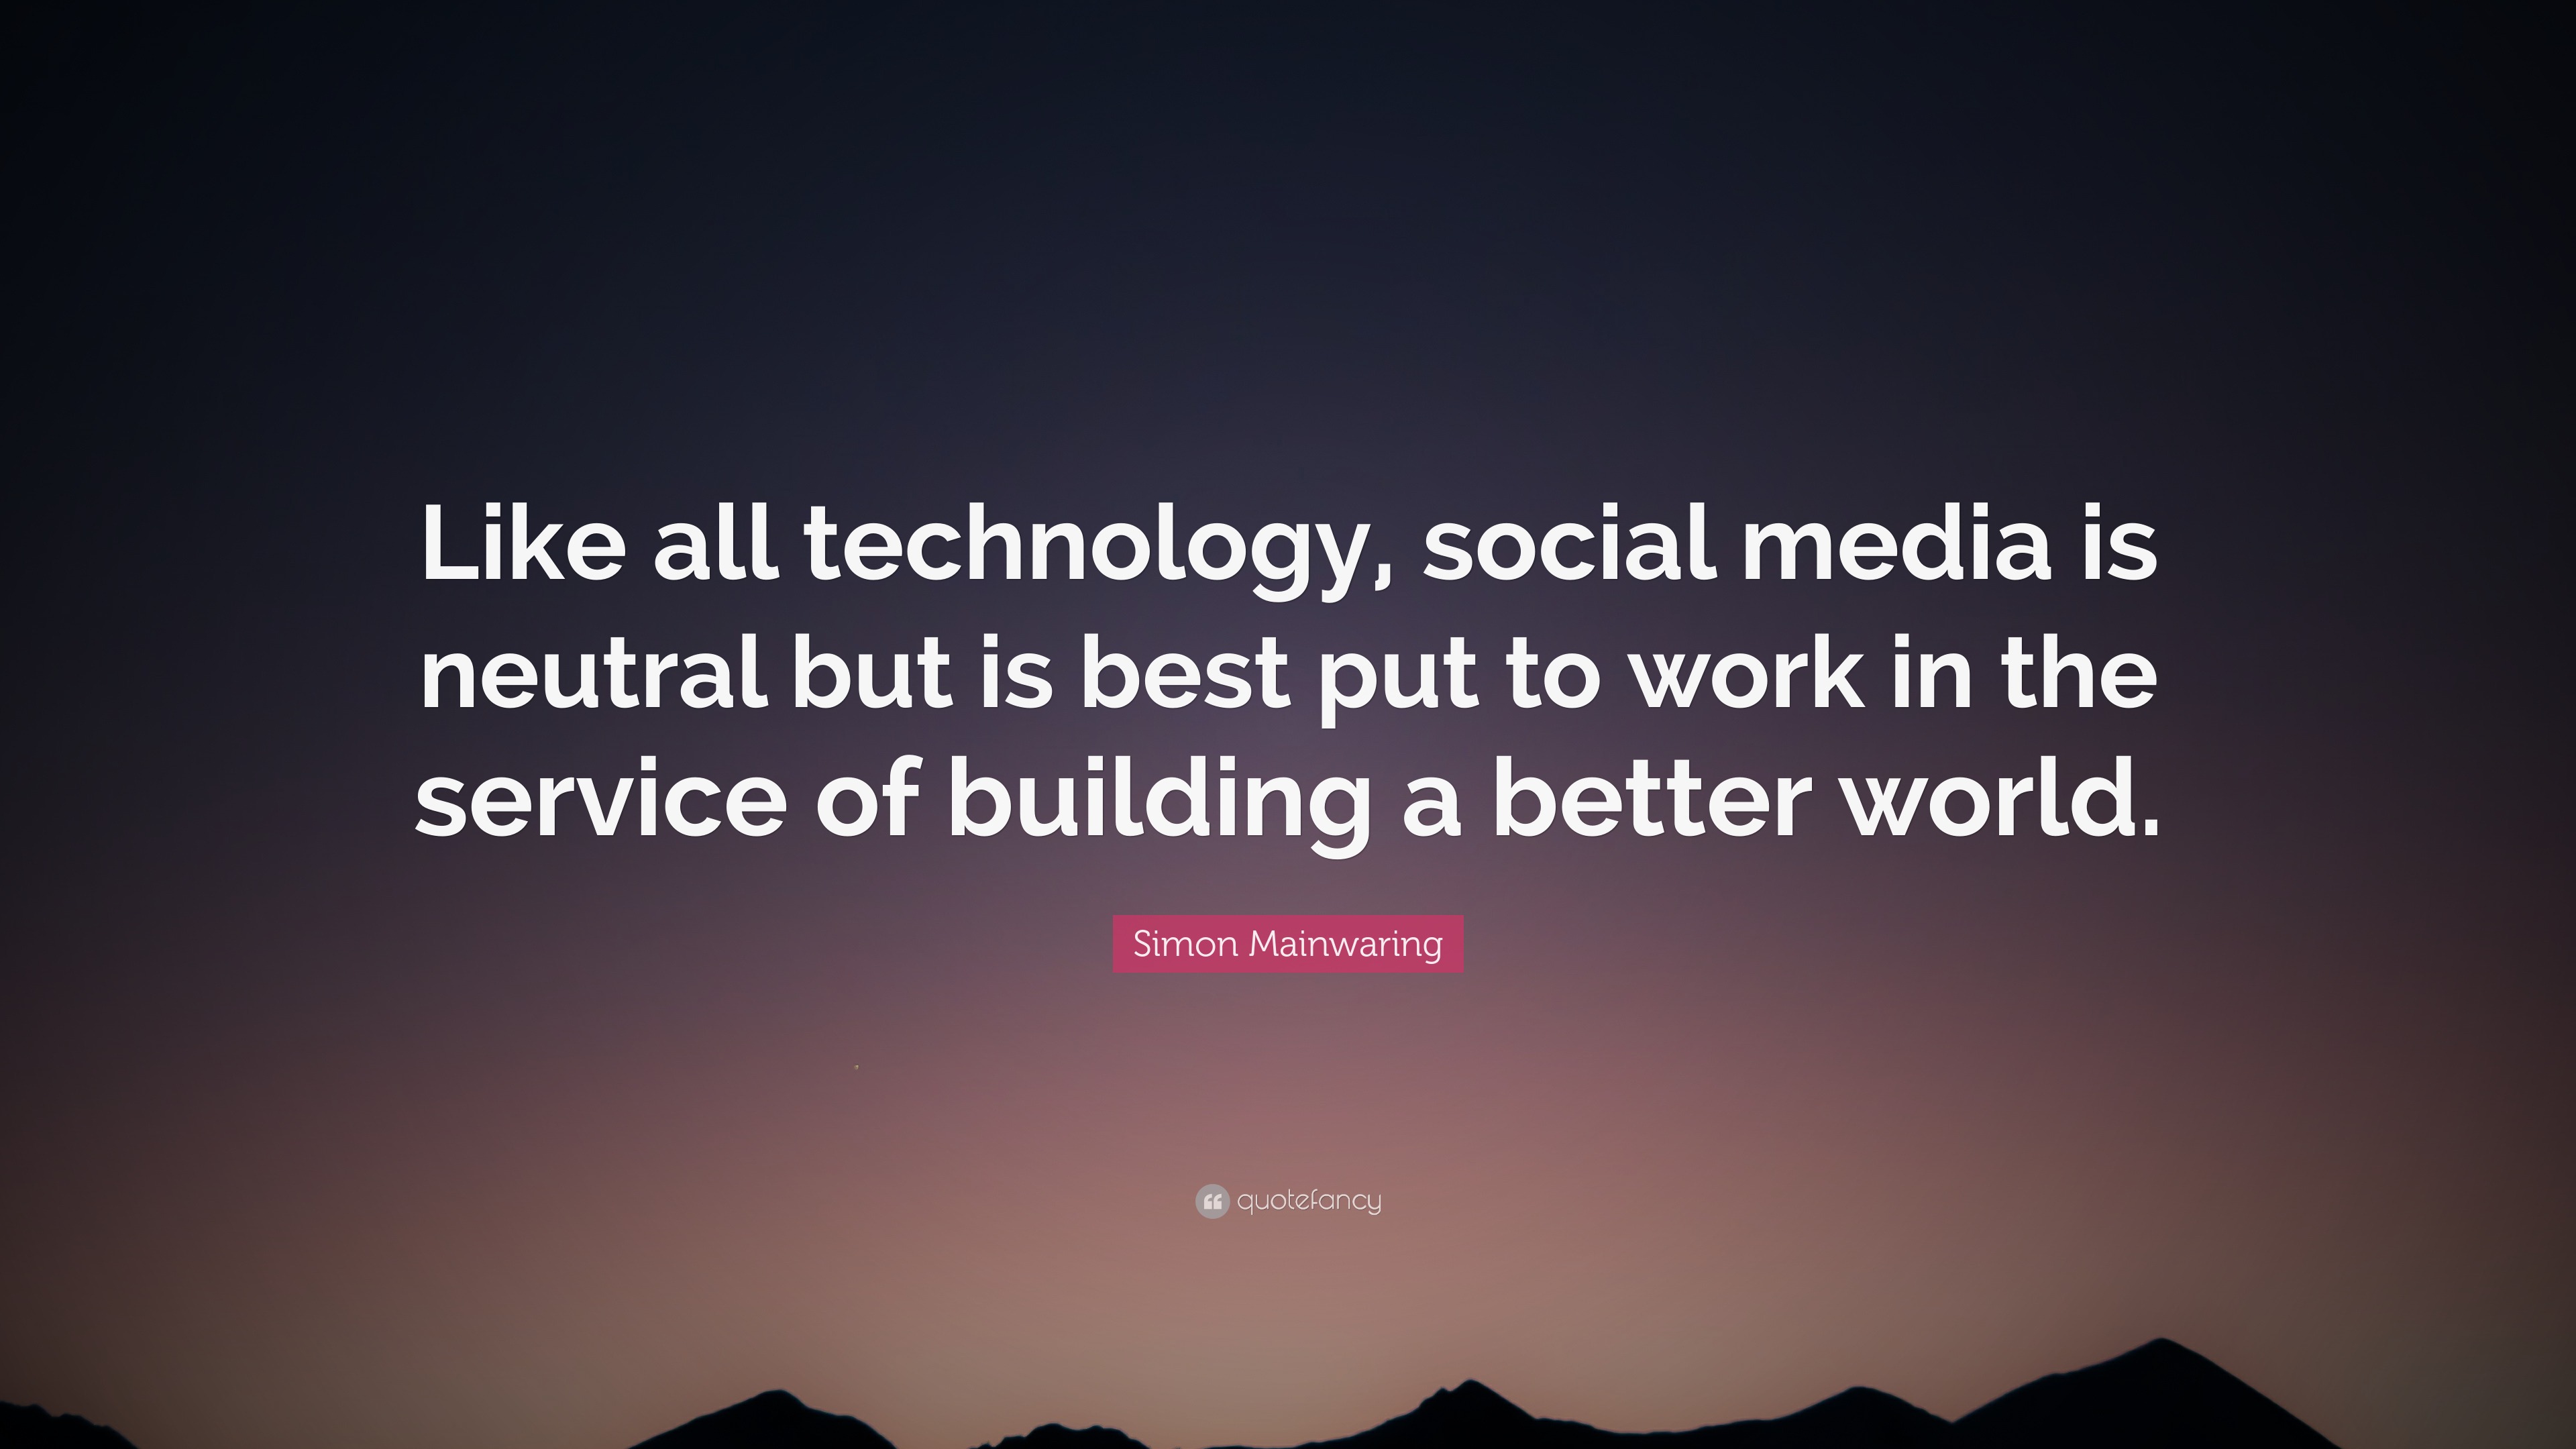 Simon Mainwaring Quote: “Like all technology, social media is neutral ...